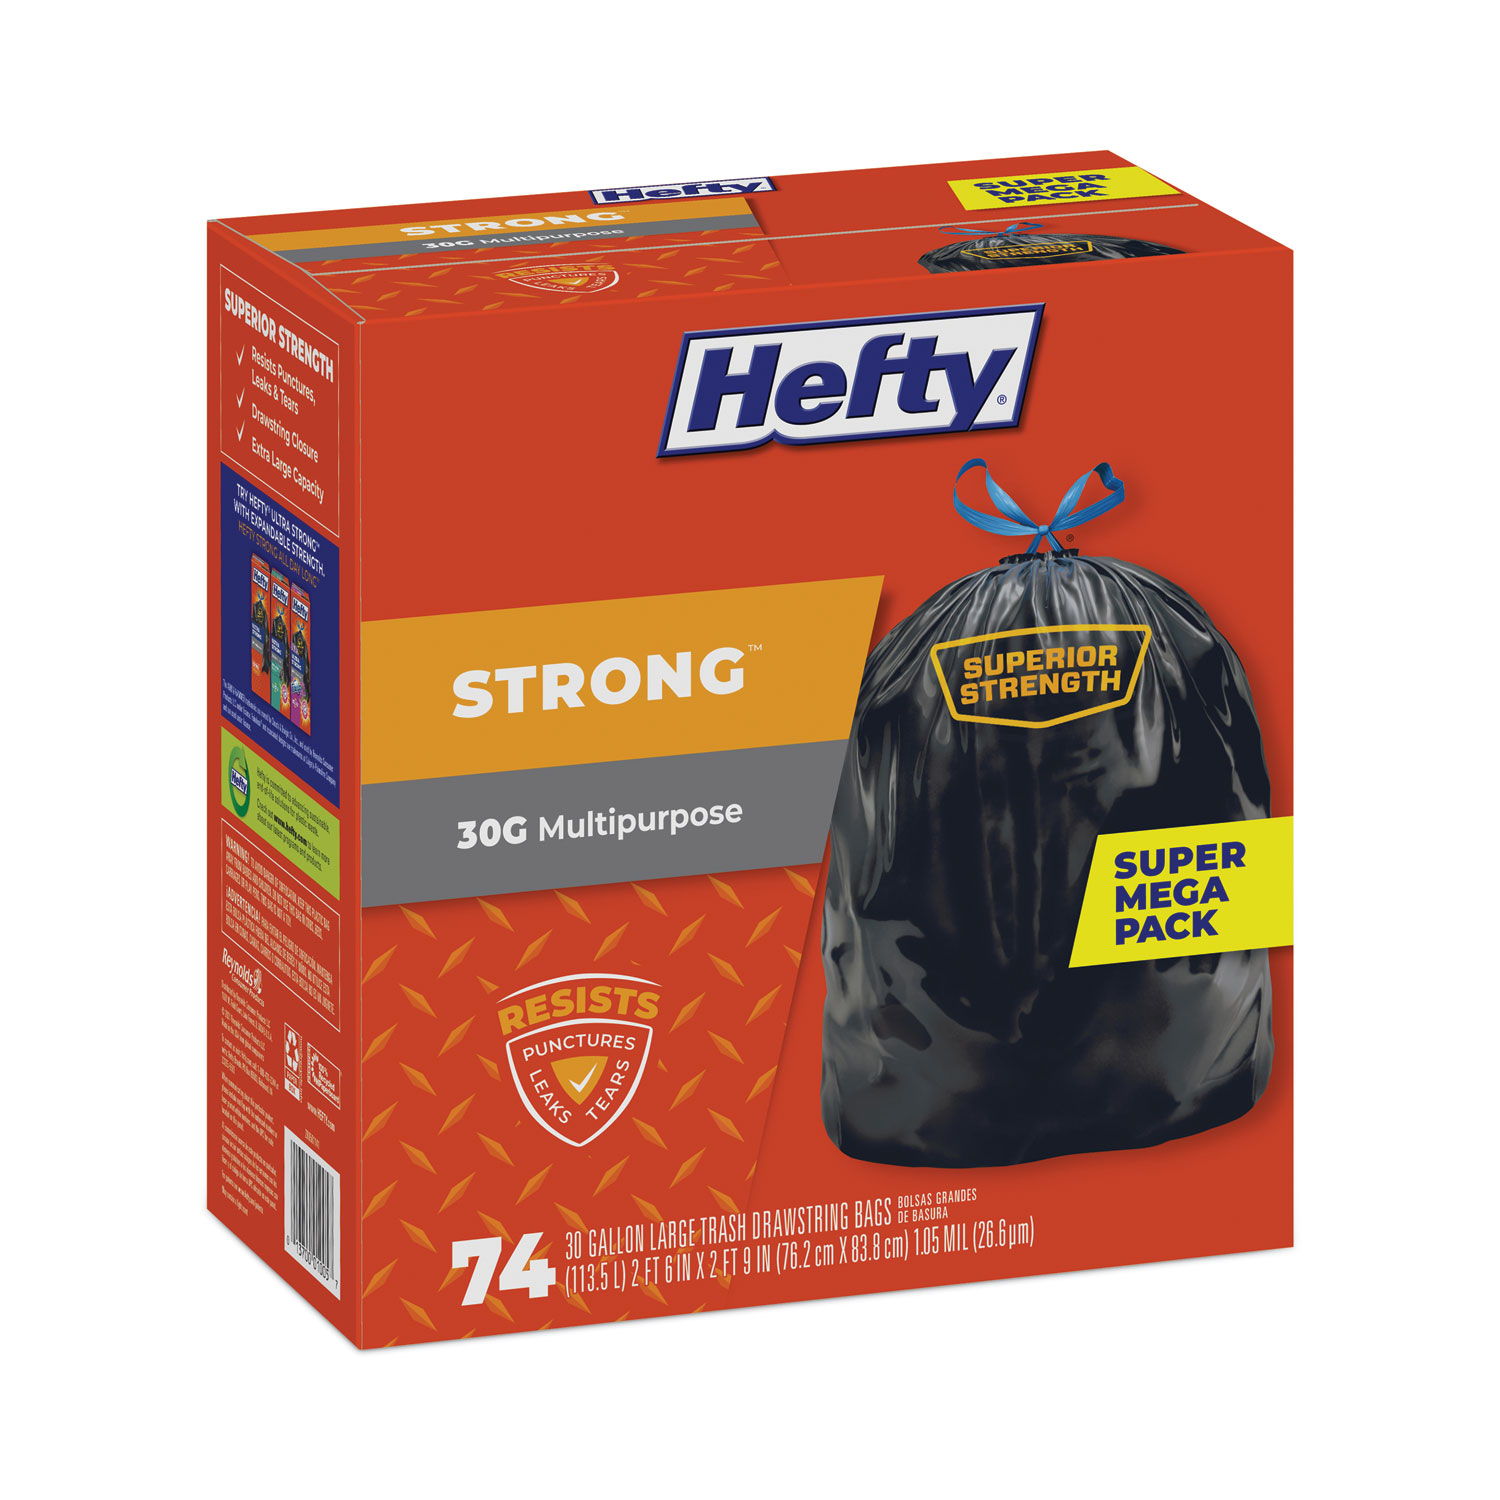 Hefty Ultra Strong Tall Kitchen and Trash Bags, 13 gal, 0.9 mil, White, 40/bx, 6 Boxes/Carton